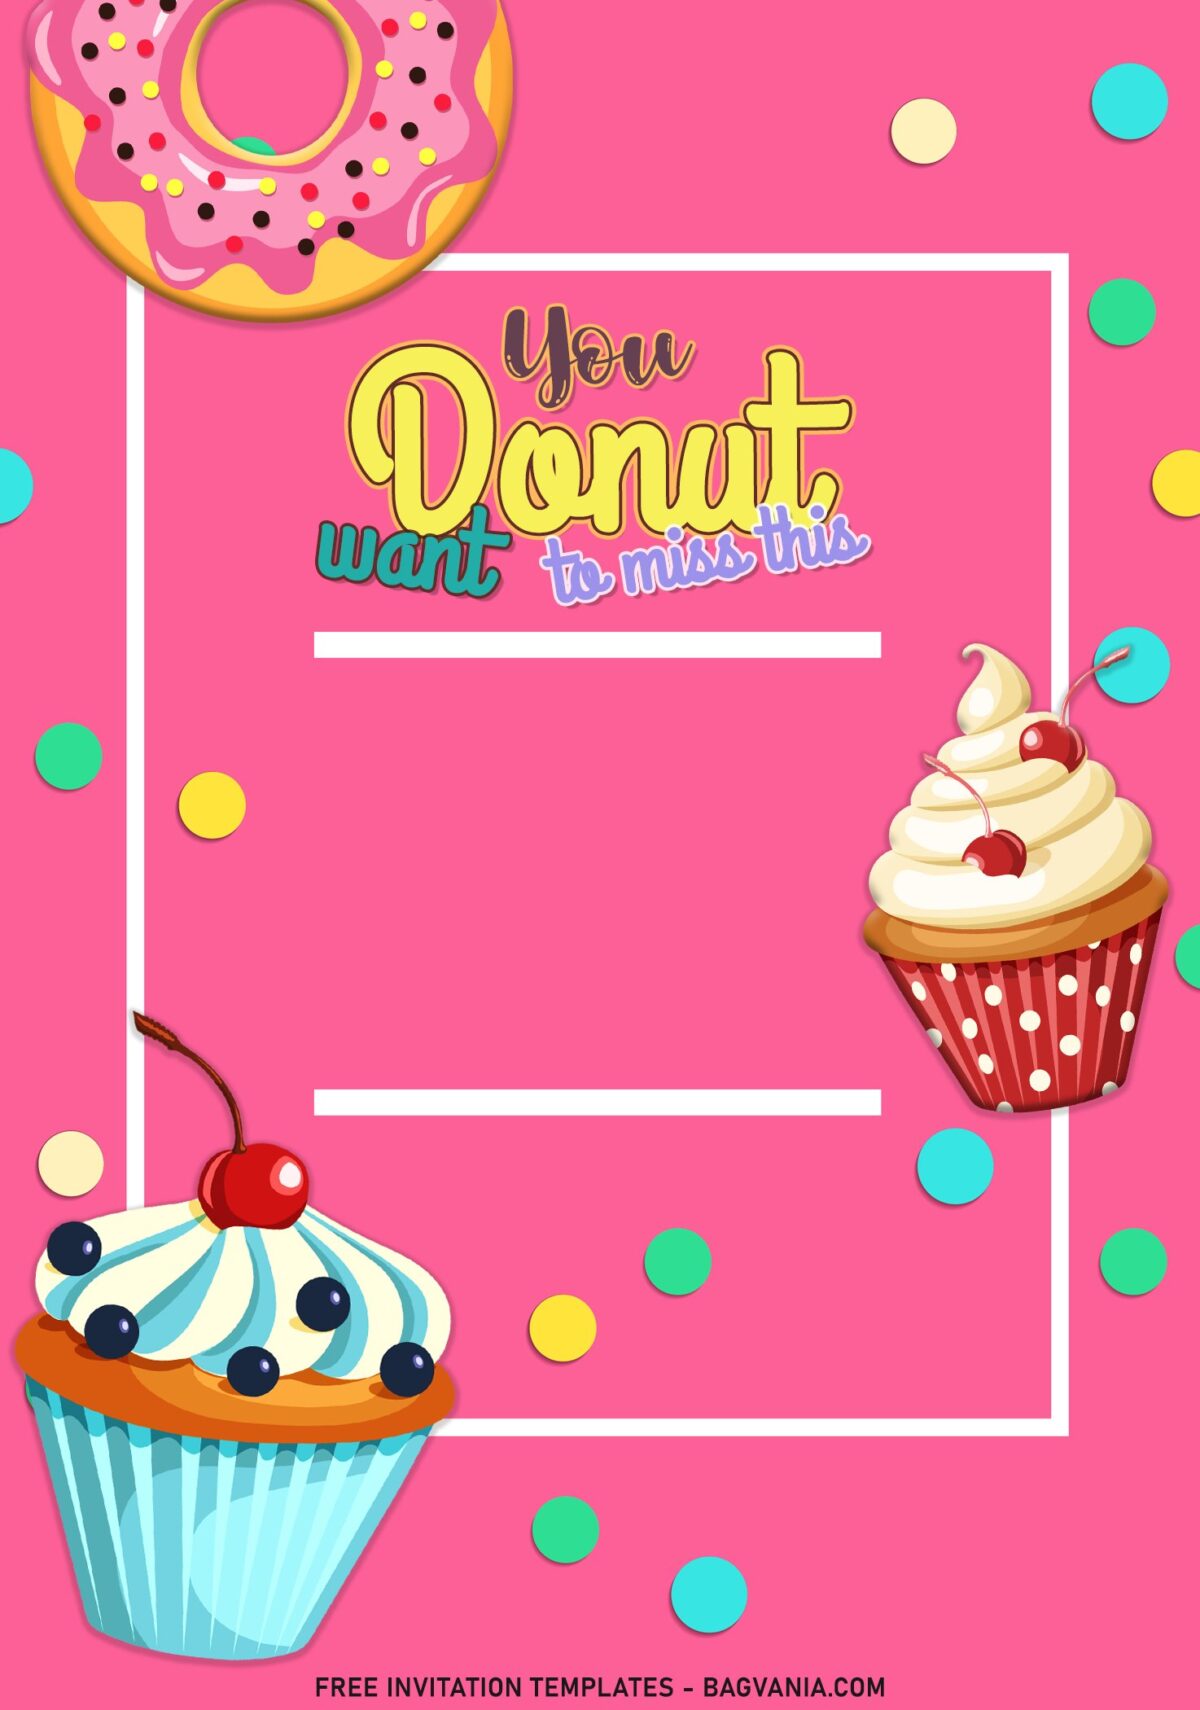 7+ Donut And Sprinkle Invitation Templates For Your Cute Little Girl's Birthday with yummy cupcakes